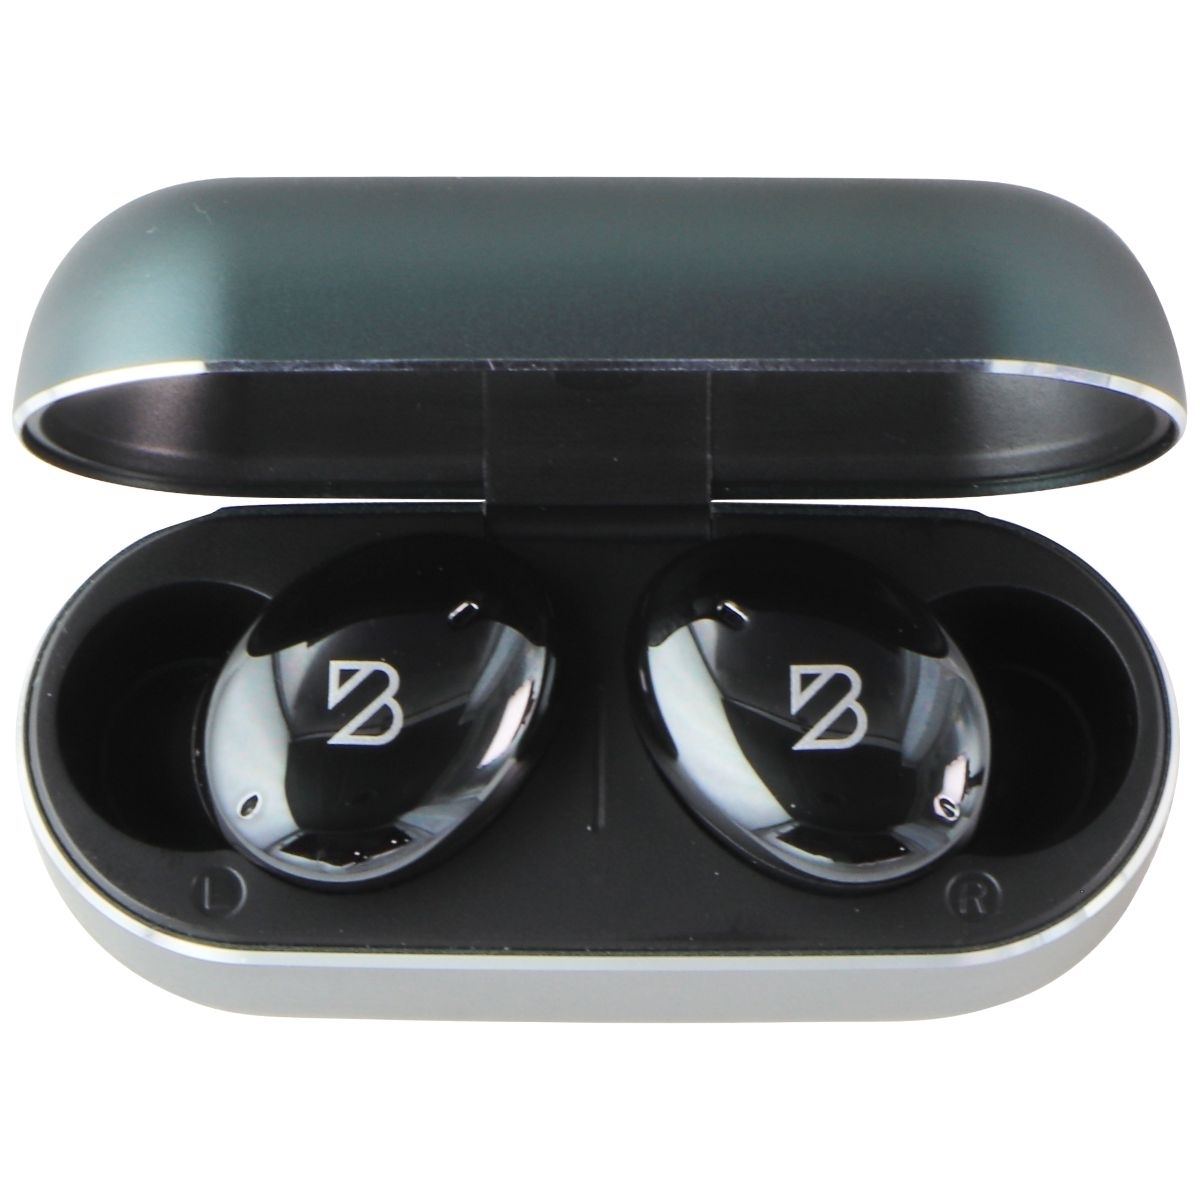 Back Bay Audio - Tempo 30 Series Wireless Bluetooth Earbuds - Black